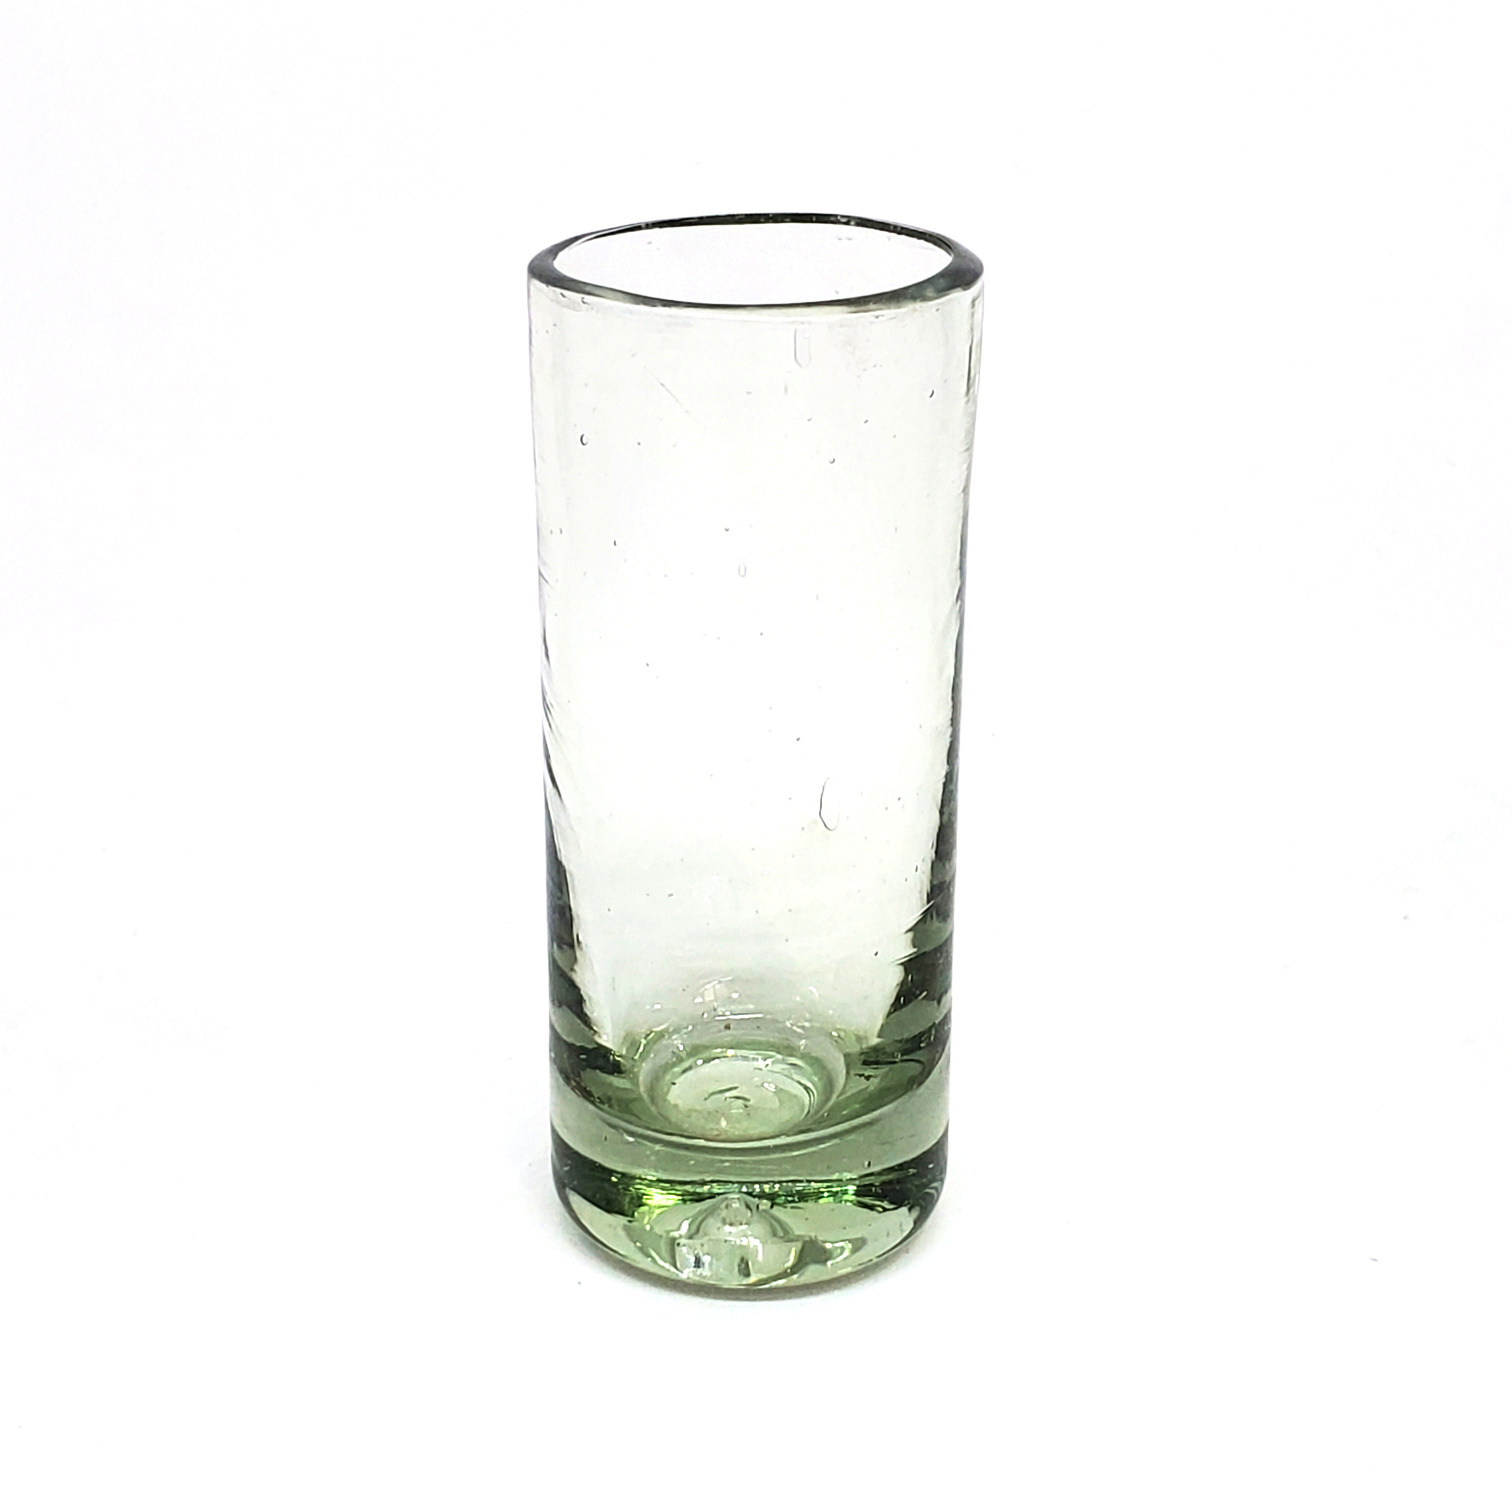 Wholesale MEXICAN GLASSWARE / Clear 2 oz Tequila Shot Glasses  / Sip your favourite tequila or mezcal with these iconic clear handcrafted shot glasses.